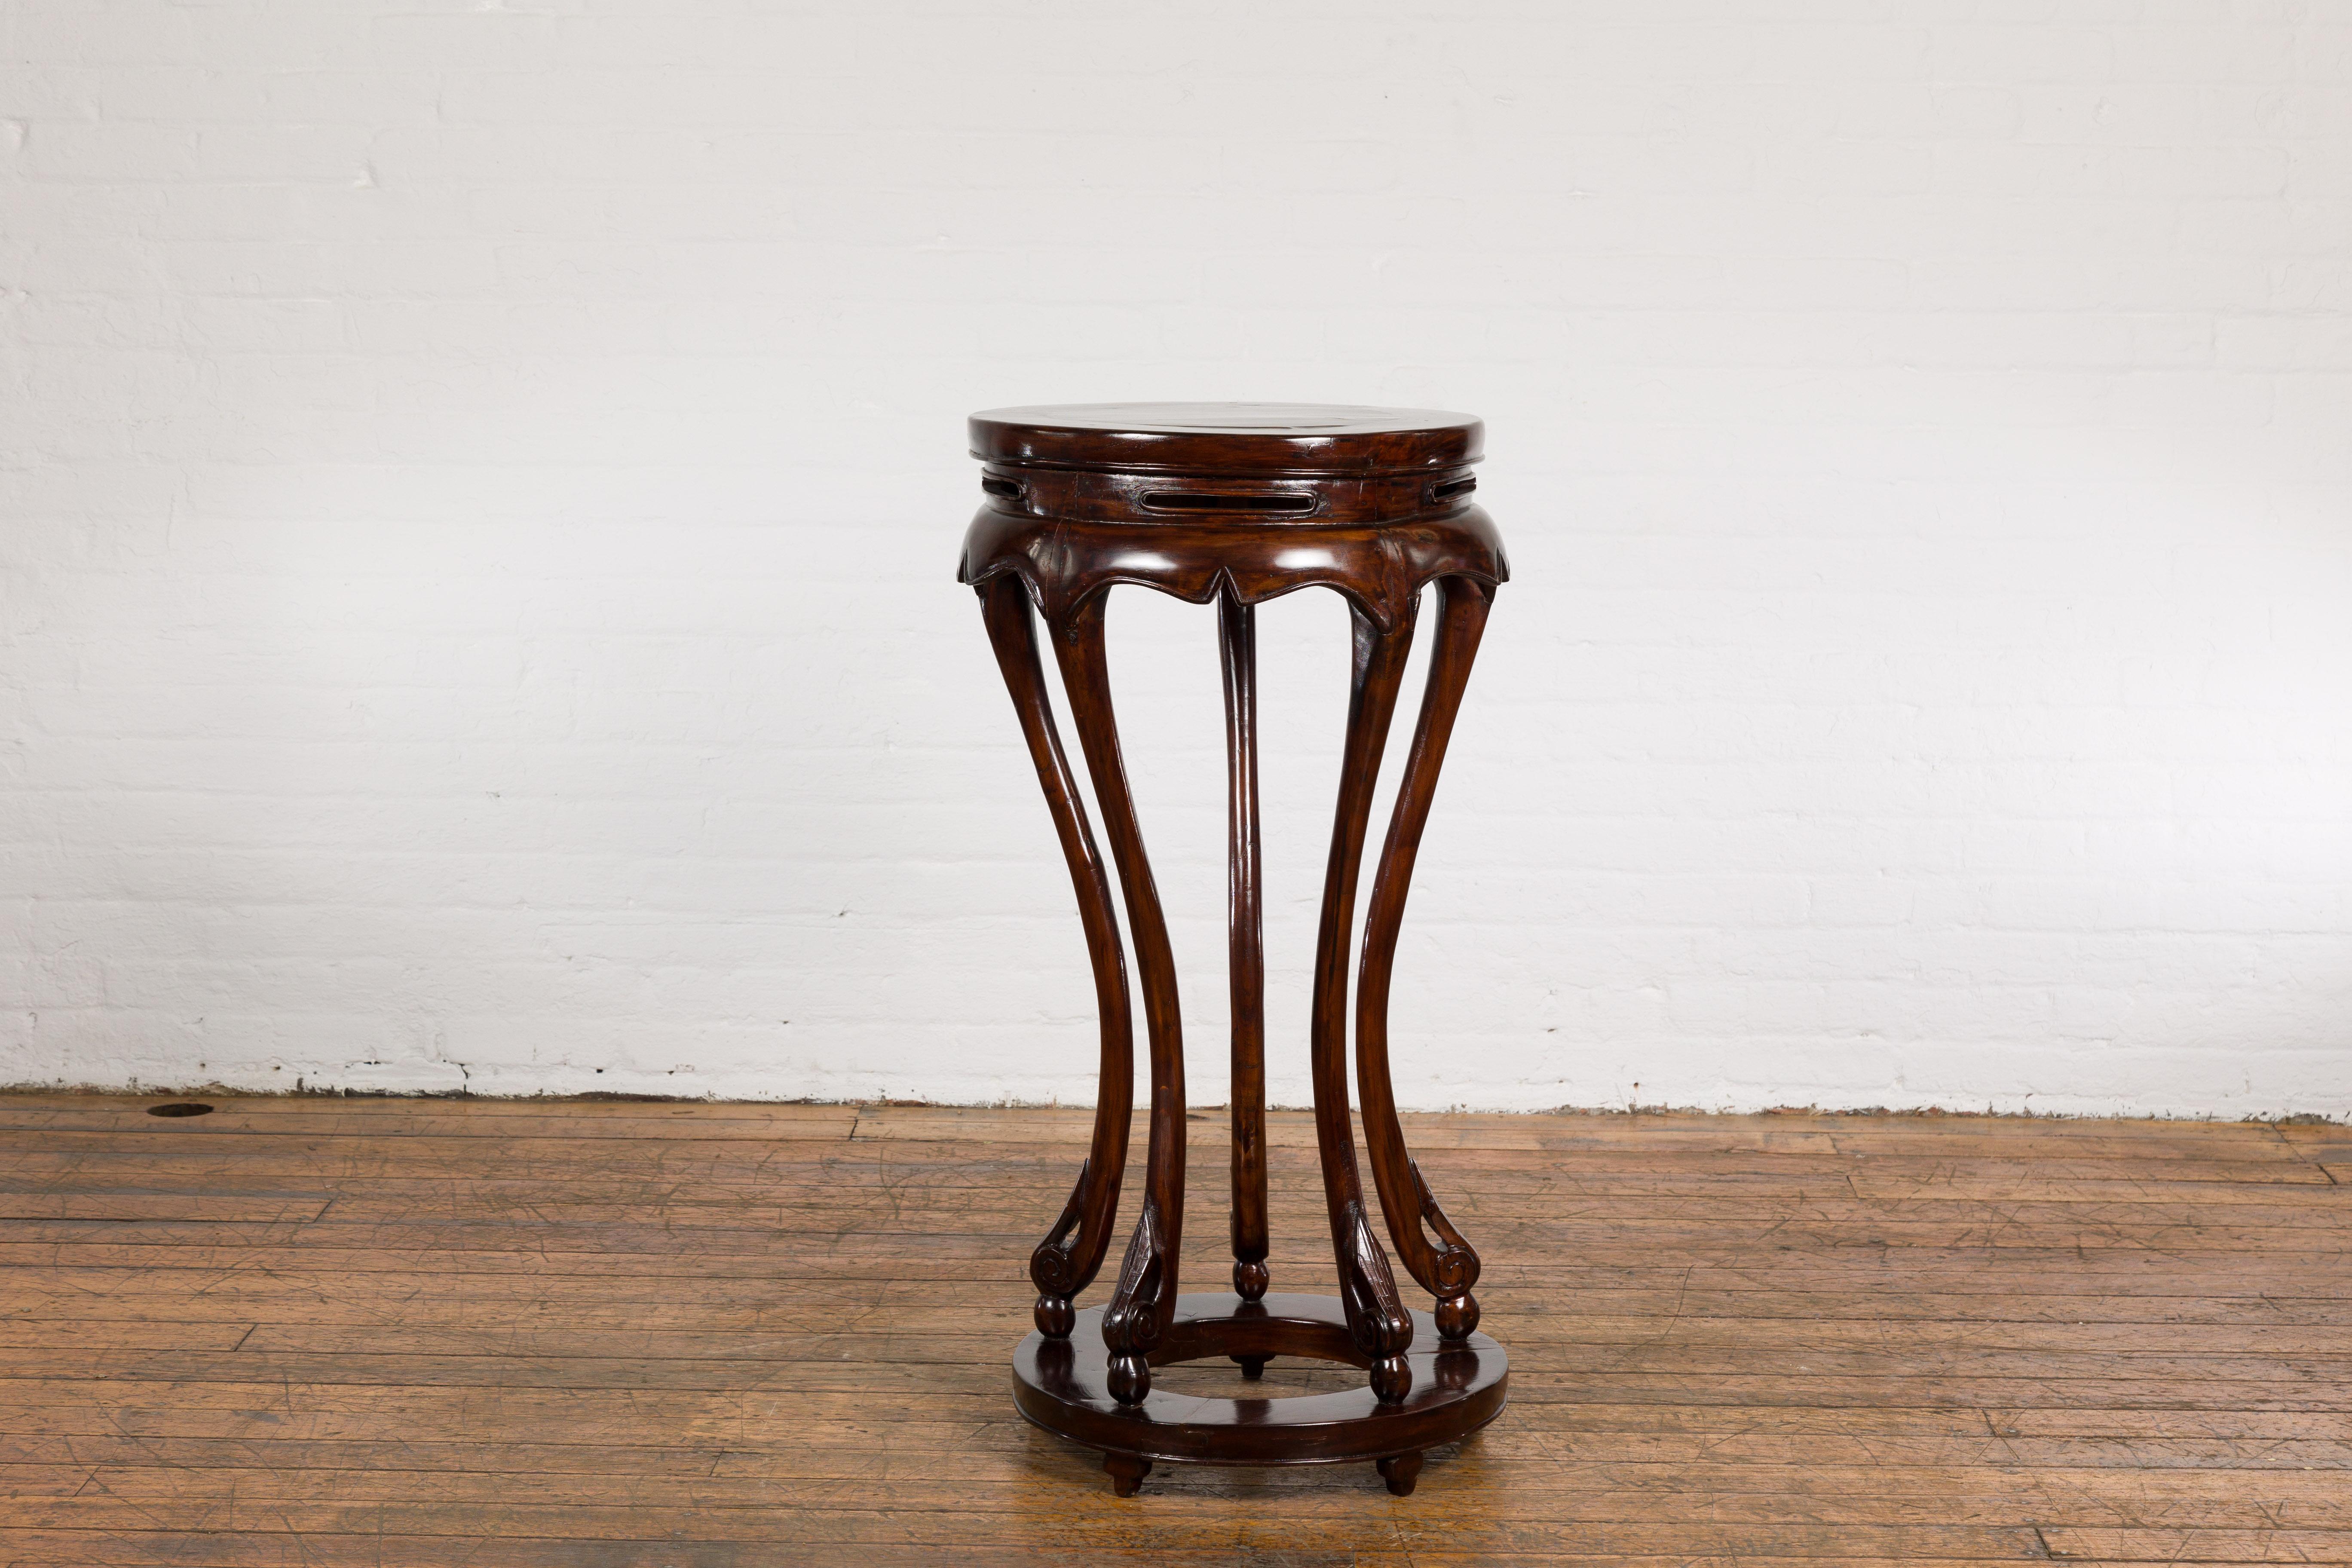 This Chinese late Qing Dynasty period wooden plant stand from the early 20th century features a circular top, carved apron, gracefully curving legs, low ring stretcher, and petite feet. This piece embodies the timeless allure and exceptional